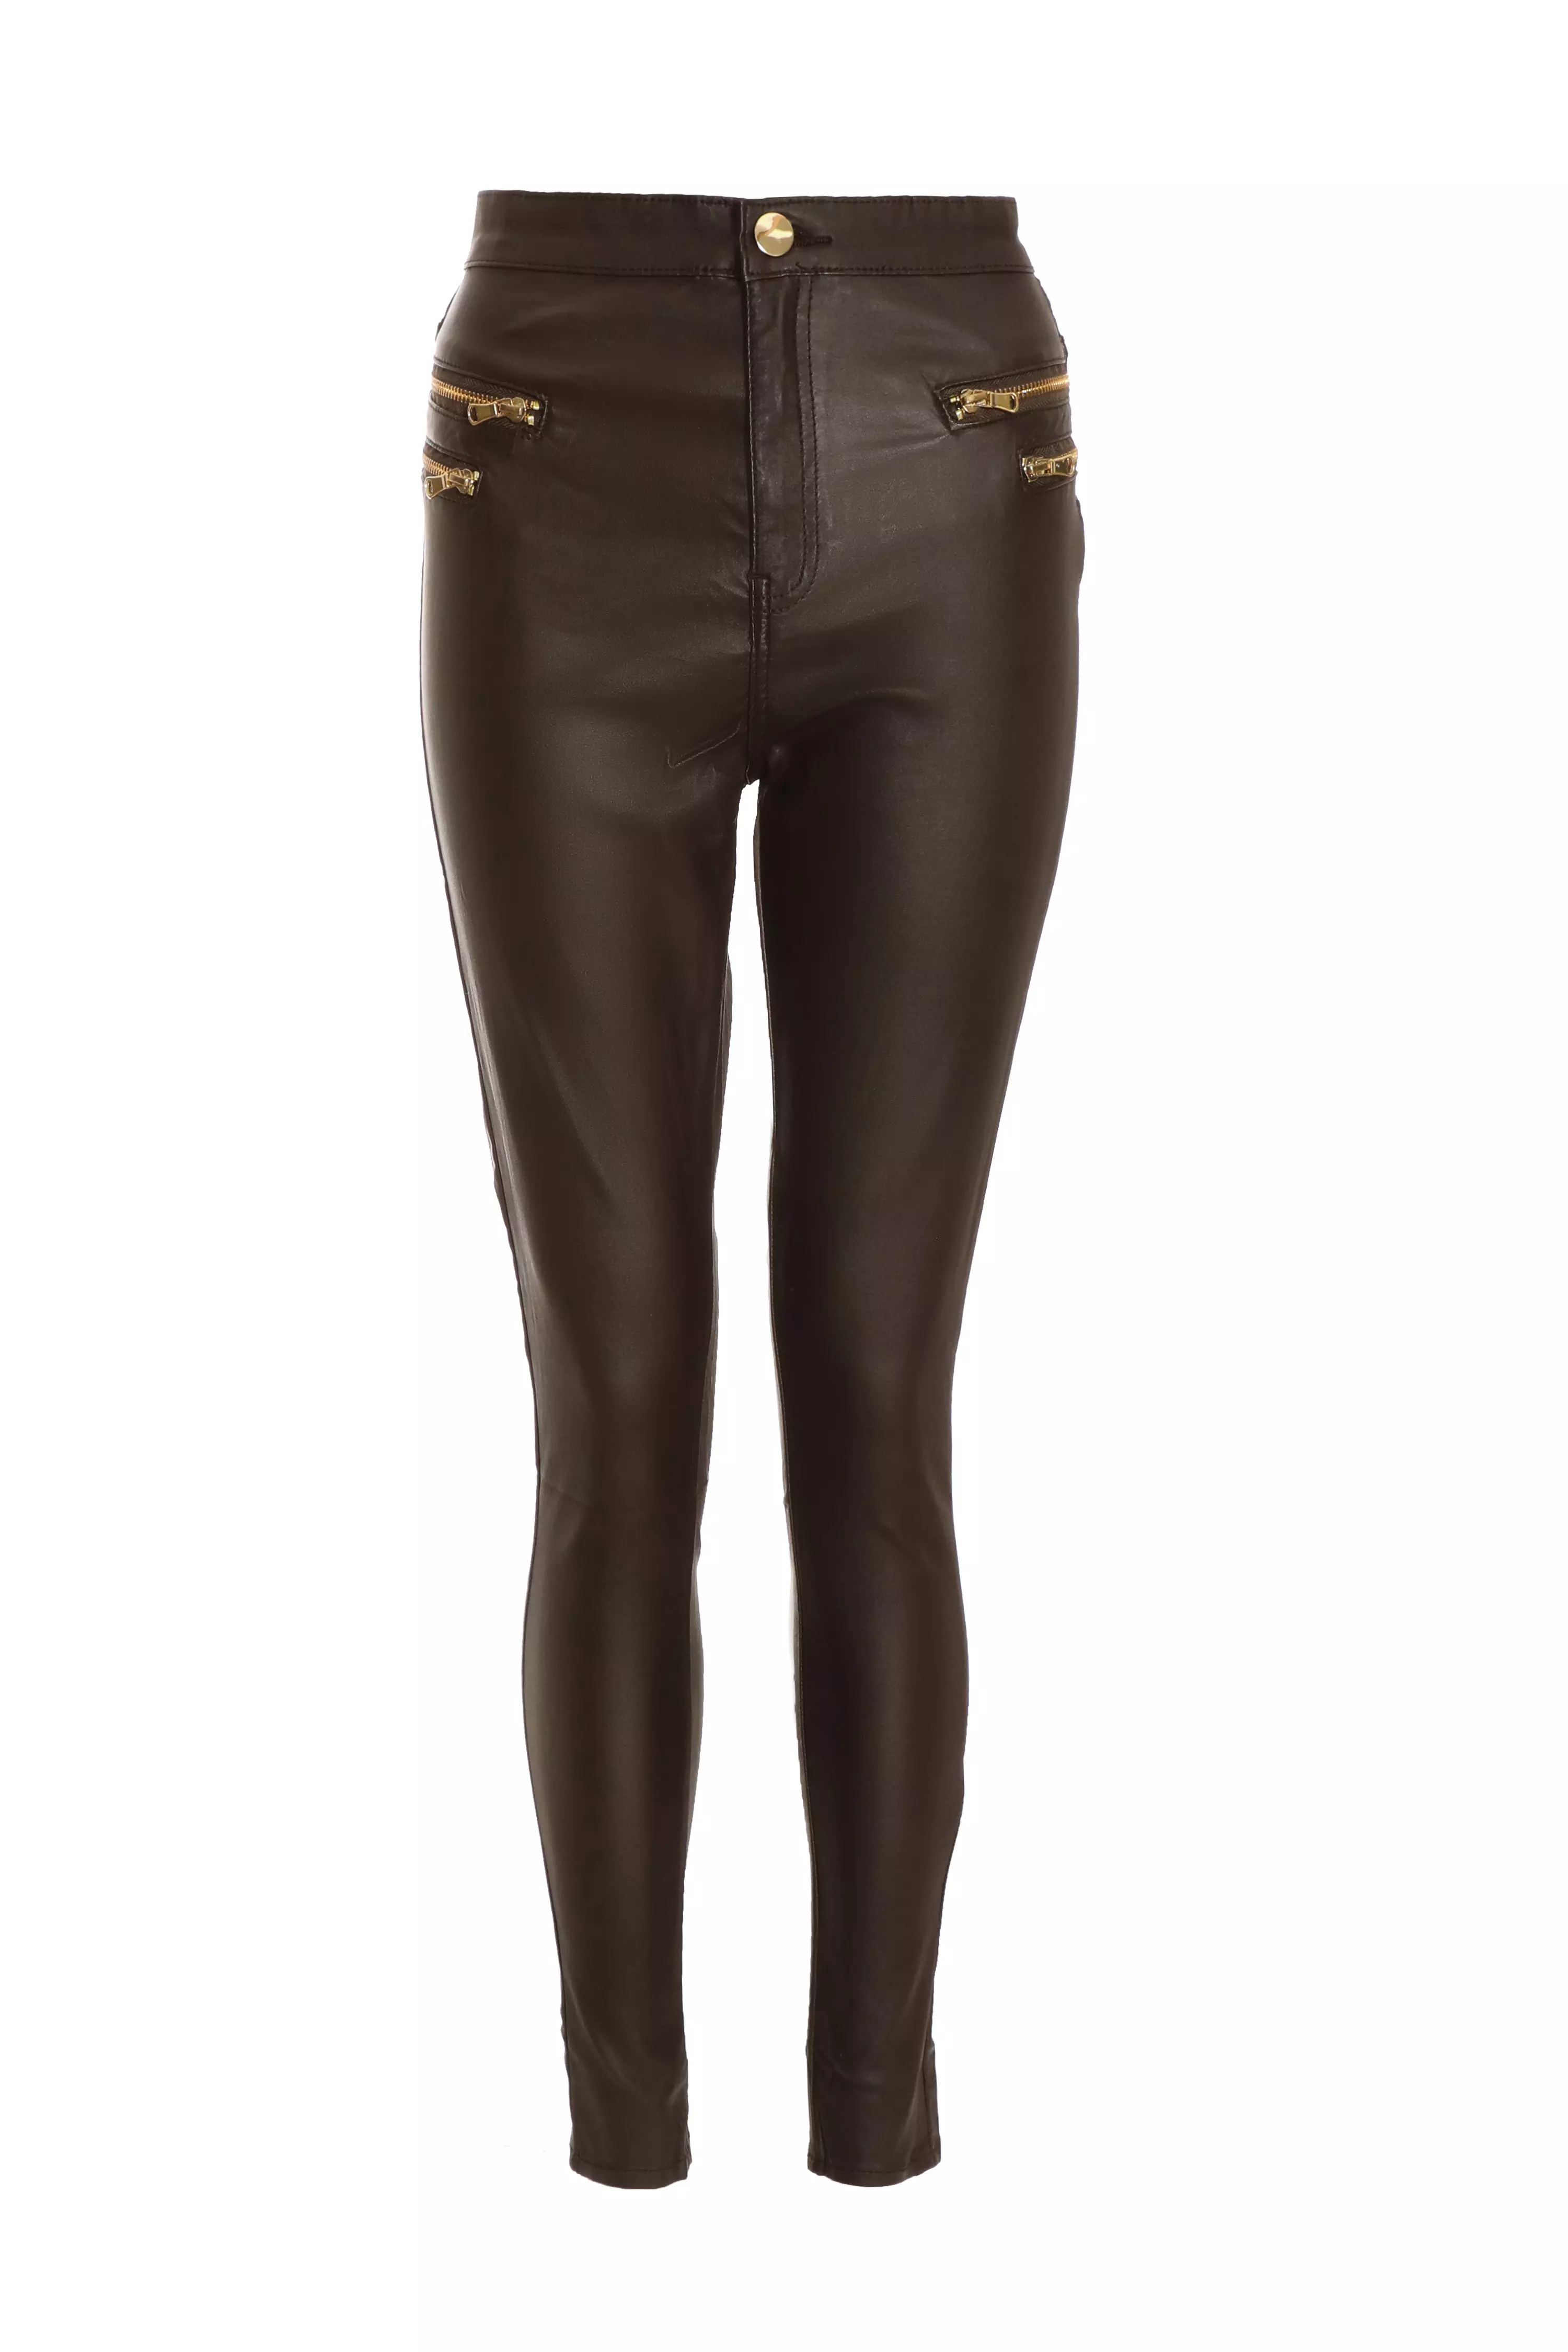 Petite Brown Faux Leather Zip Skinny Trousers